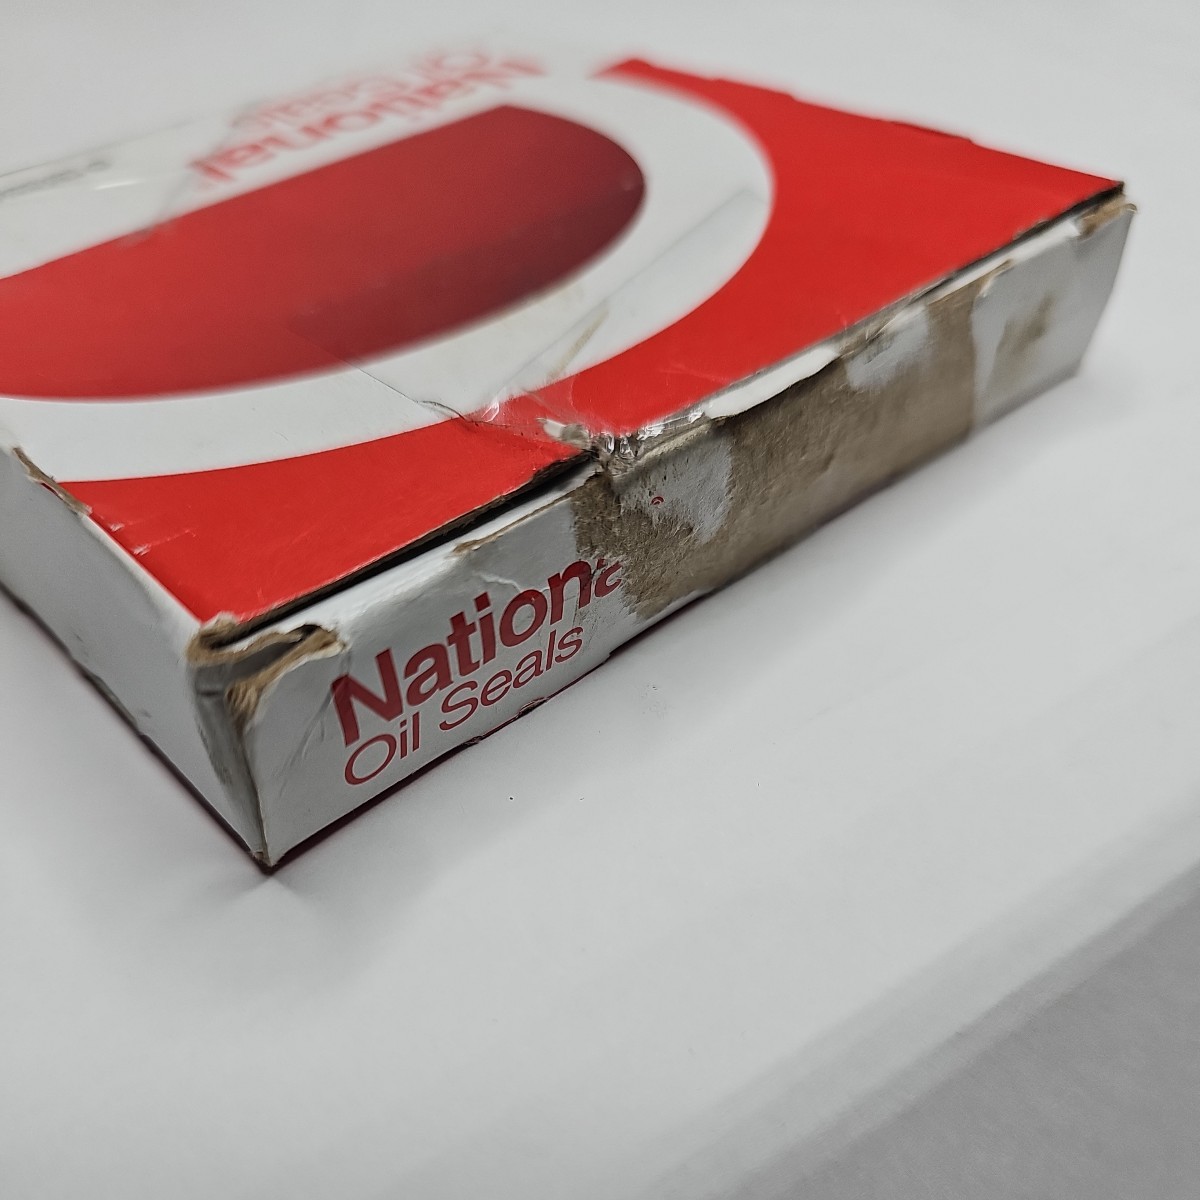 National oil seal 4250 DODGE FORD MAZDA PLYMOUTH ②